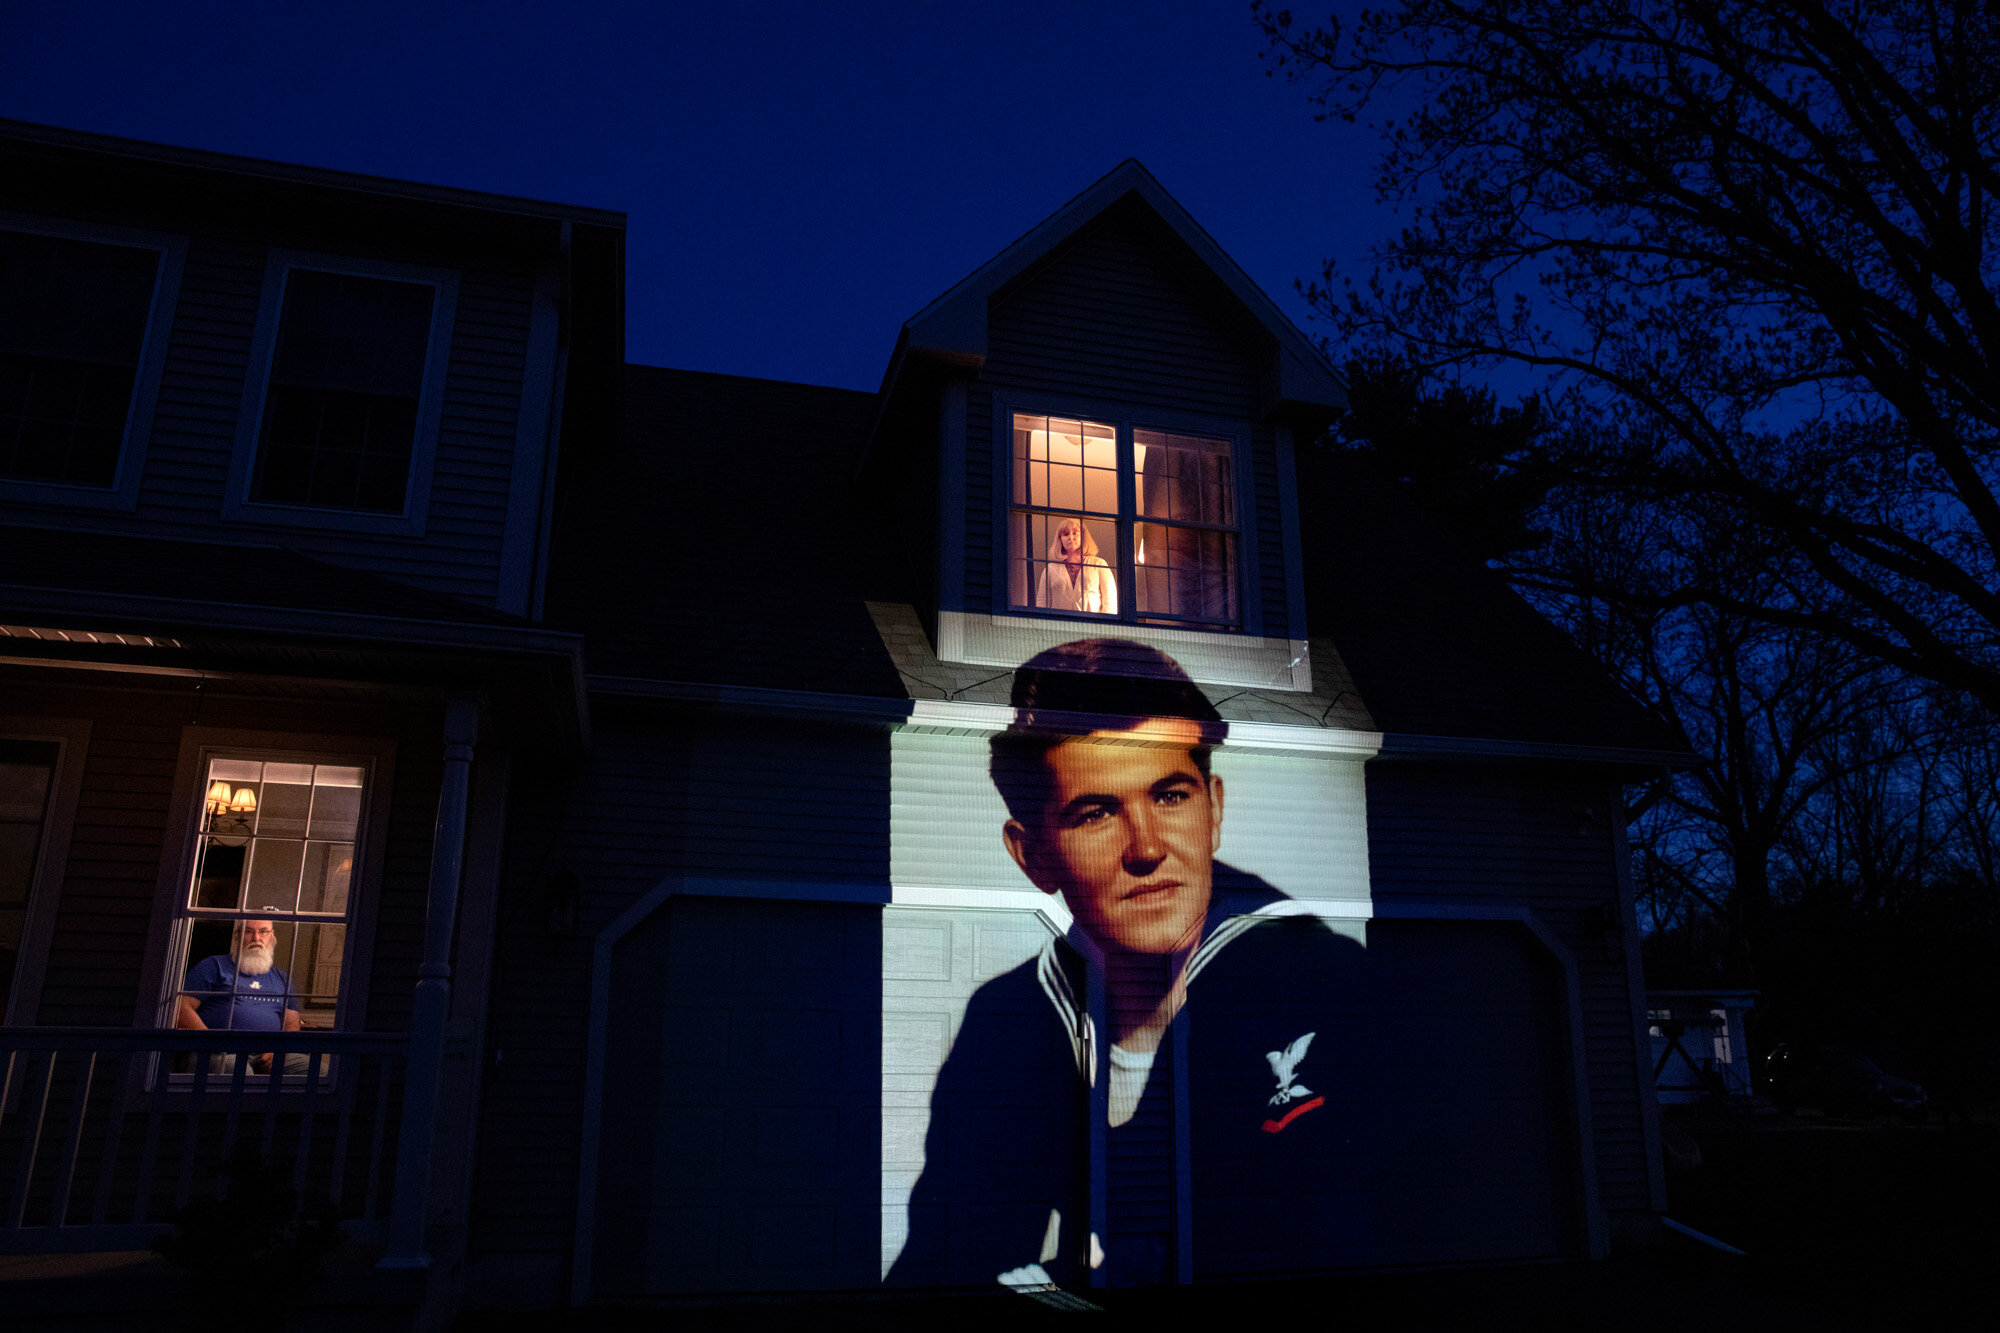  An image of U.S. Navy veteran Stephen Kulig is projected onto the home of his daughter, Elizabeth DeForest, as she looks out the window of a spare bedroom while her husband, Kevin, sits downstairs, in Chicopee, Mass., on May 3, 2020. Kulig, a reside